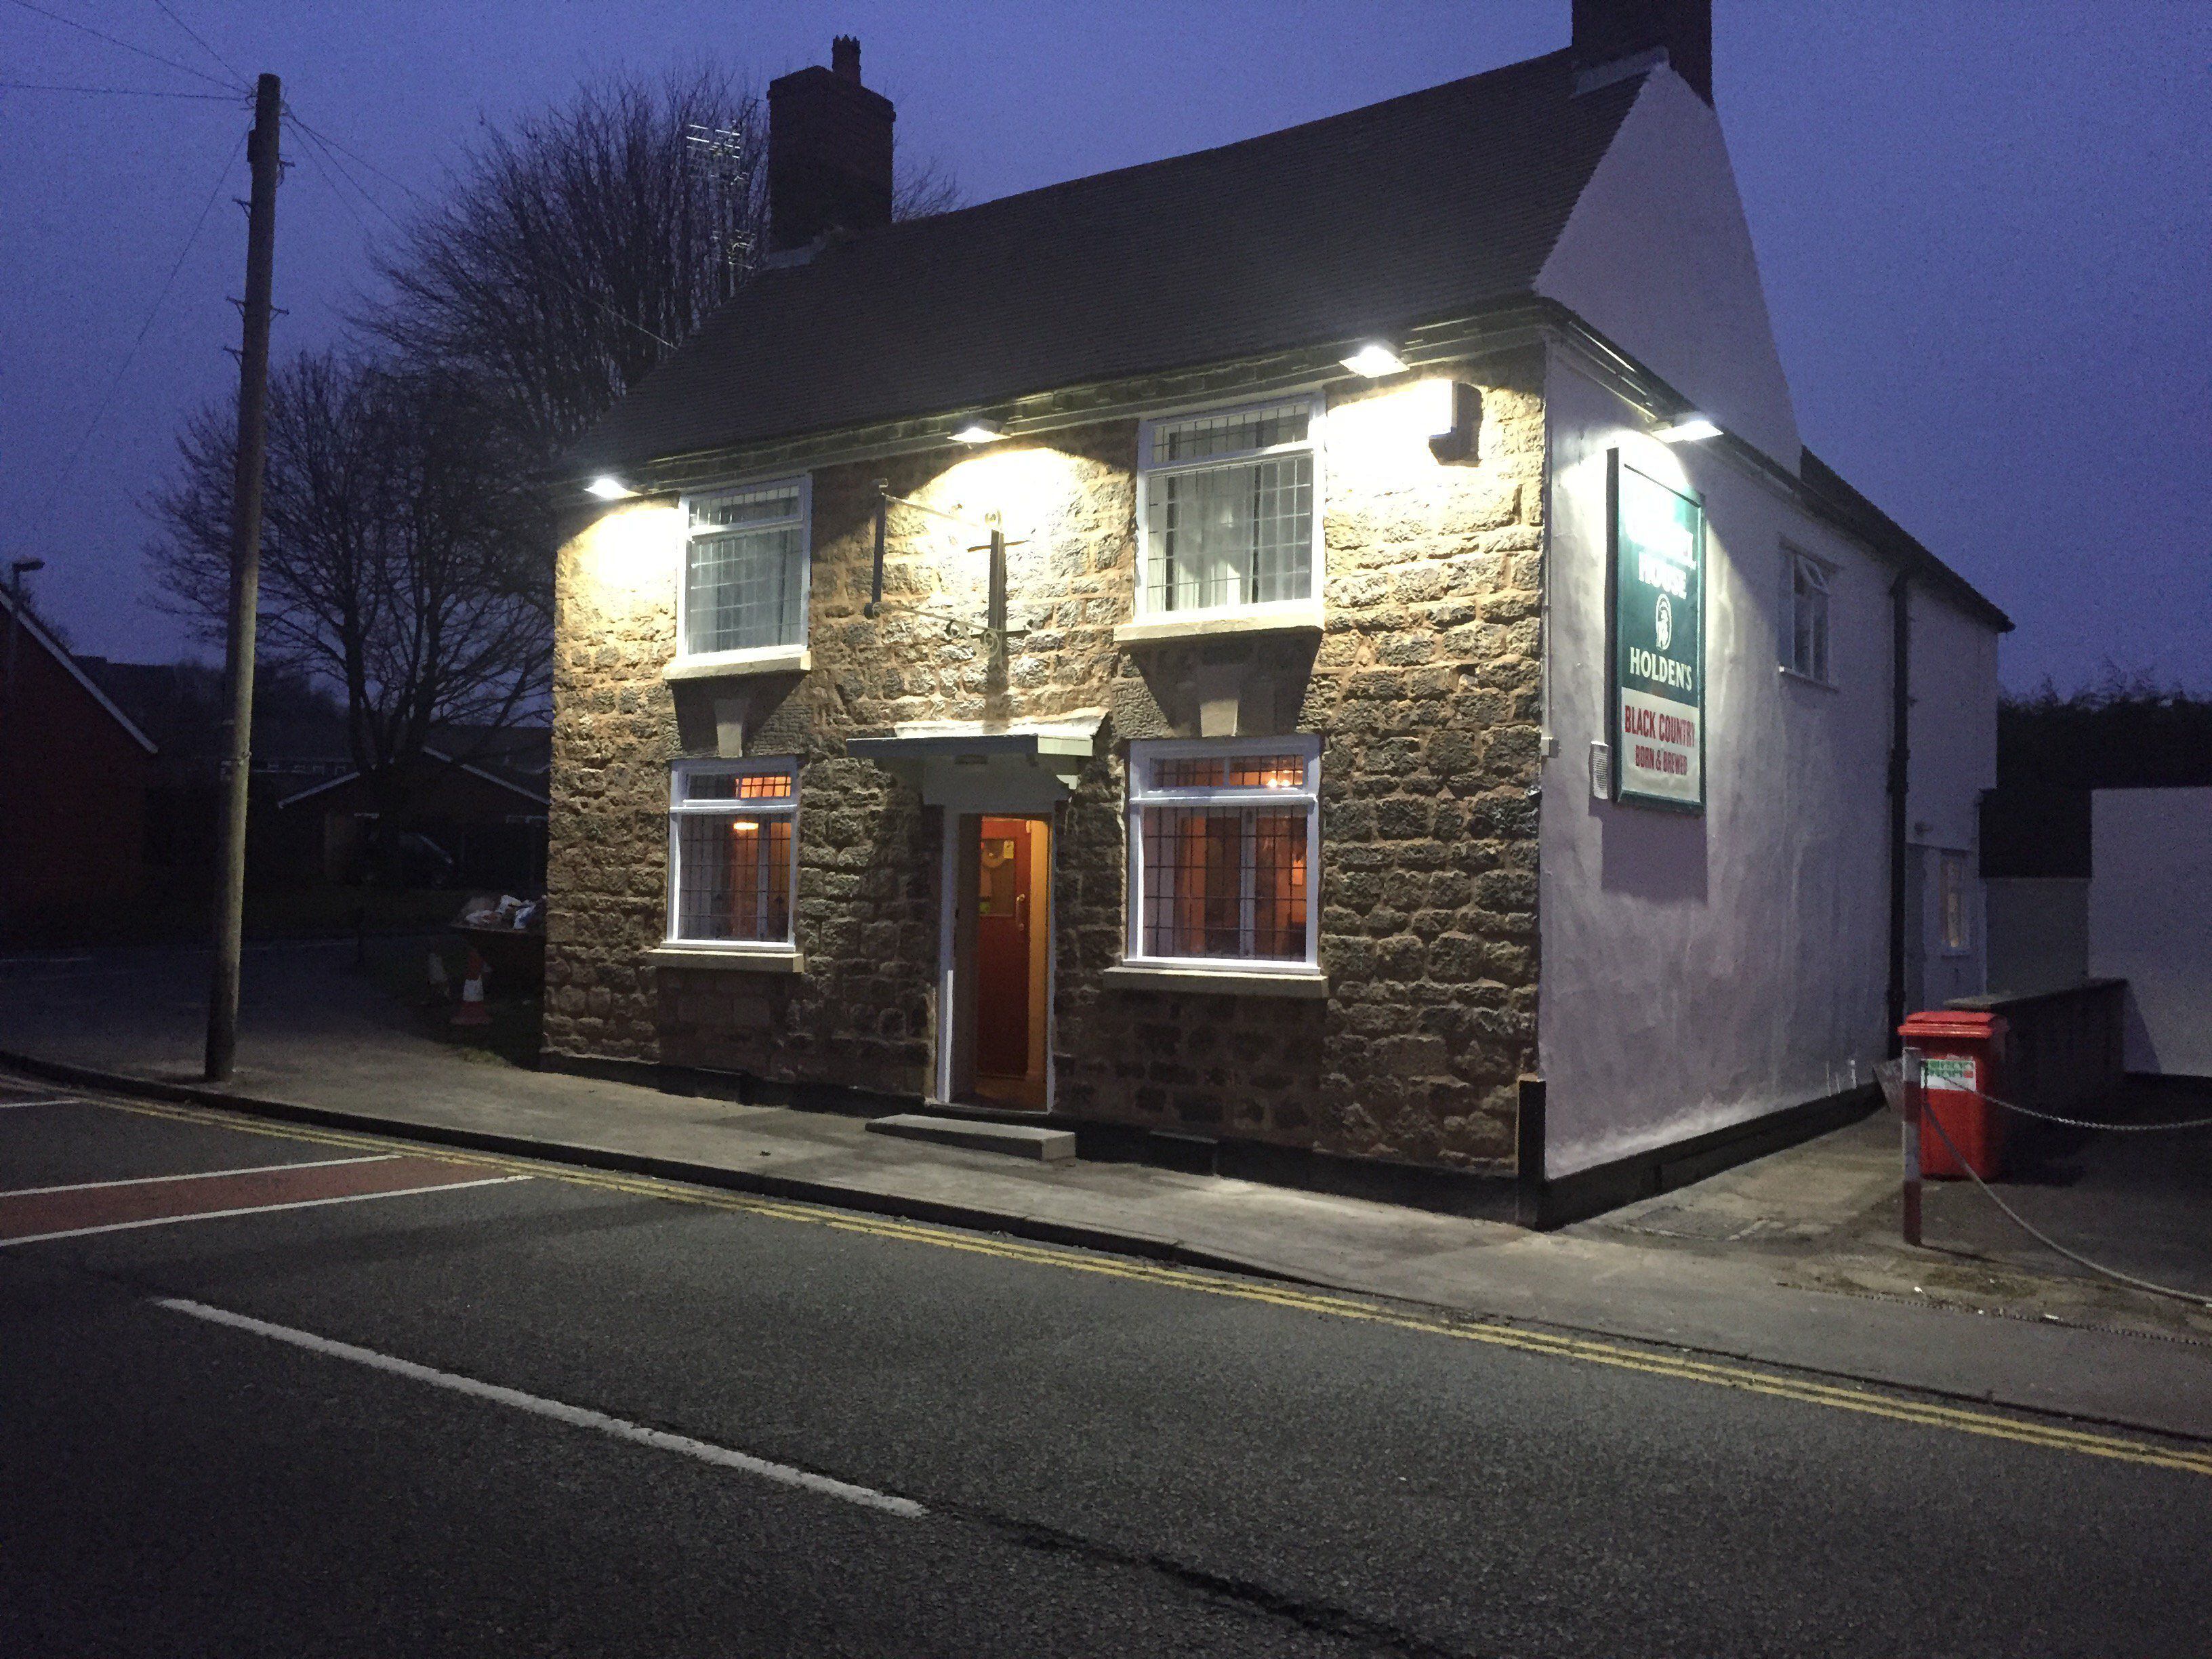 Lower Gornal pubs aims to reopen after £100k refurbishment